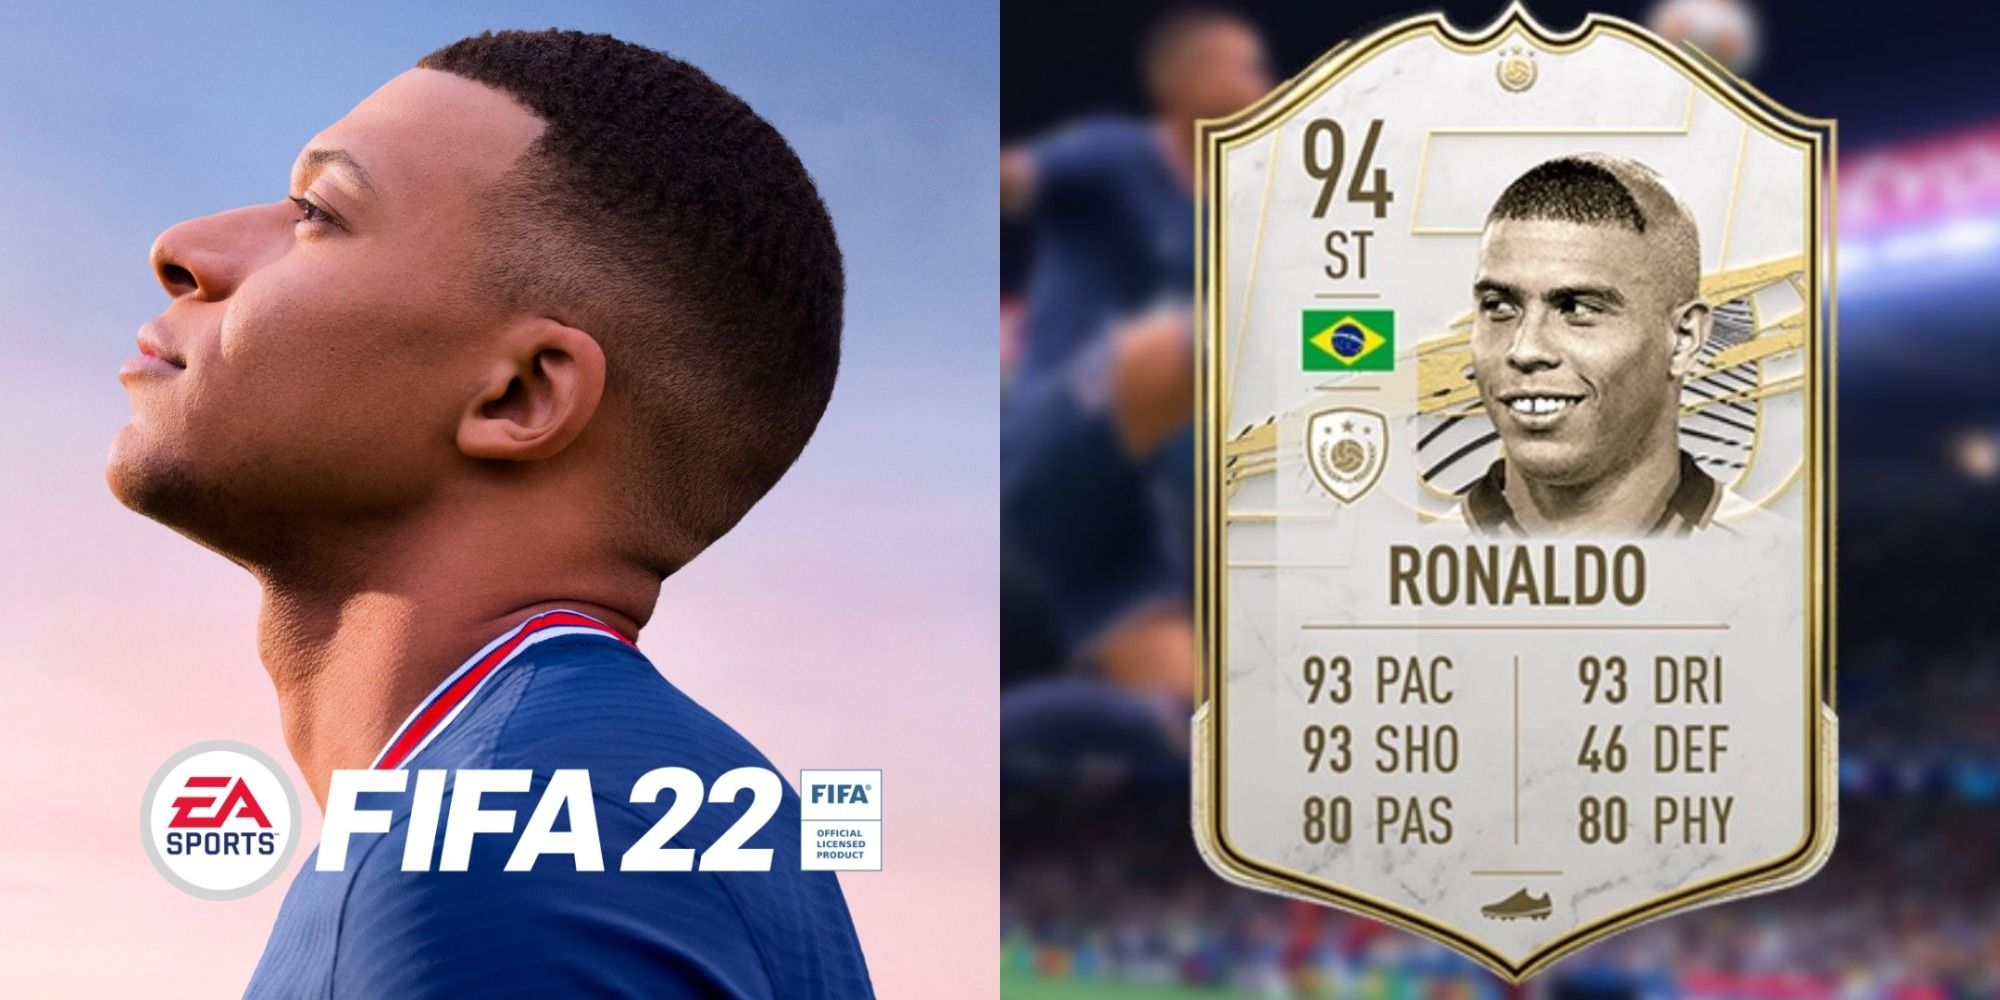 Split image showing the cover for FIFA 22 and Ronaldo's mid Icon